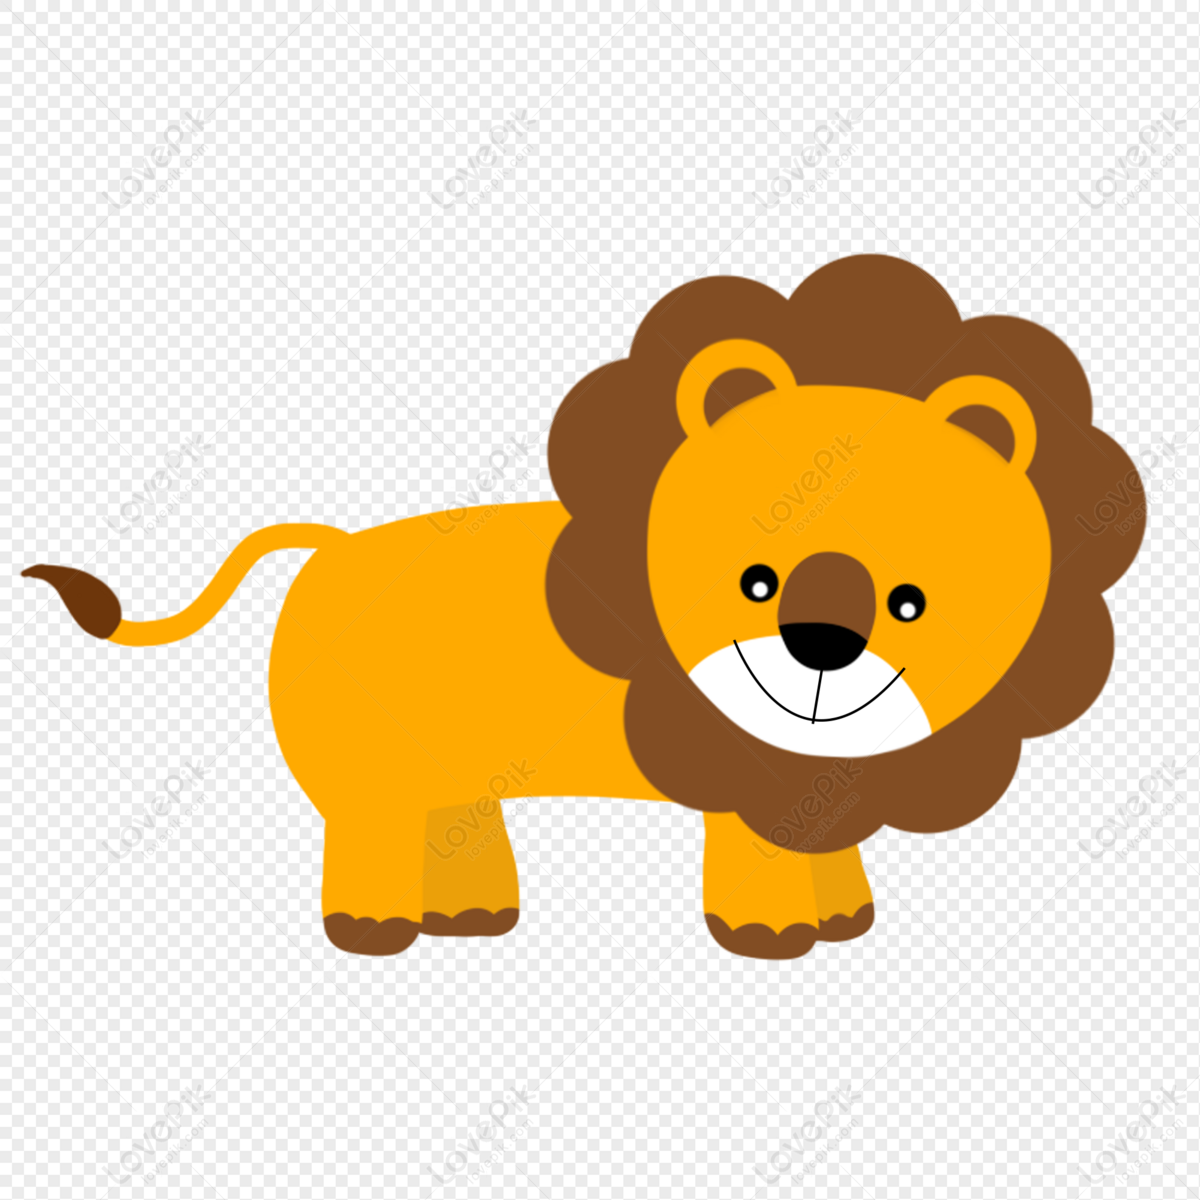 Lion PNG Picture And Clipart Image For Free Download - Lovepik | 401243235